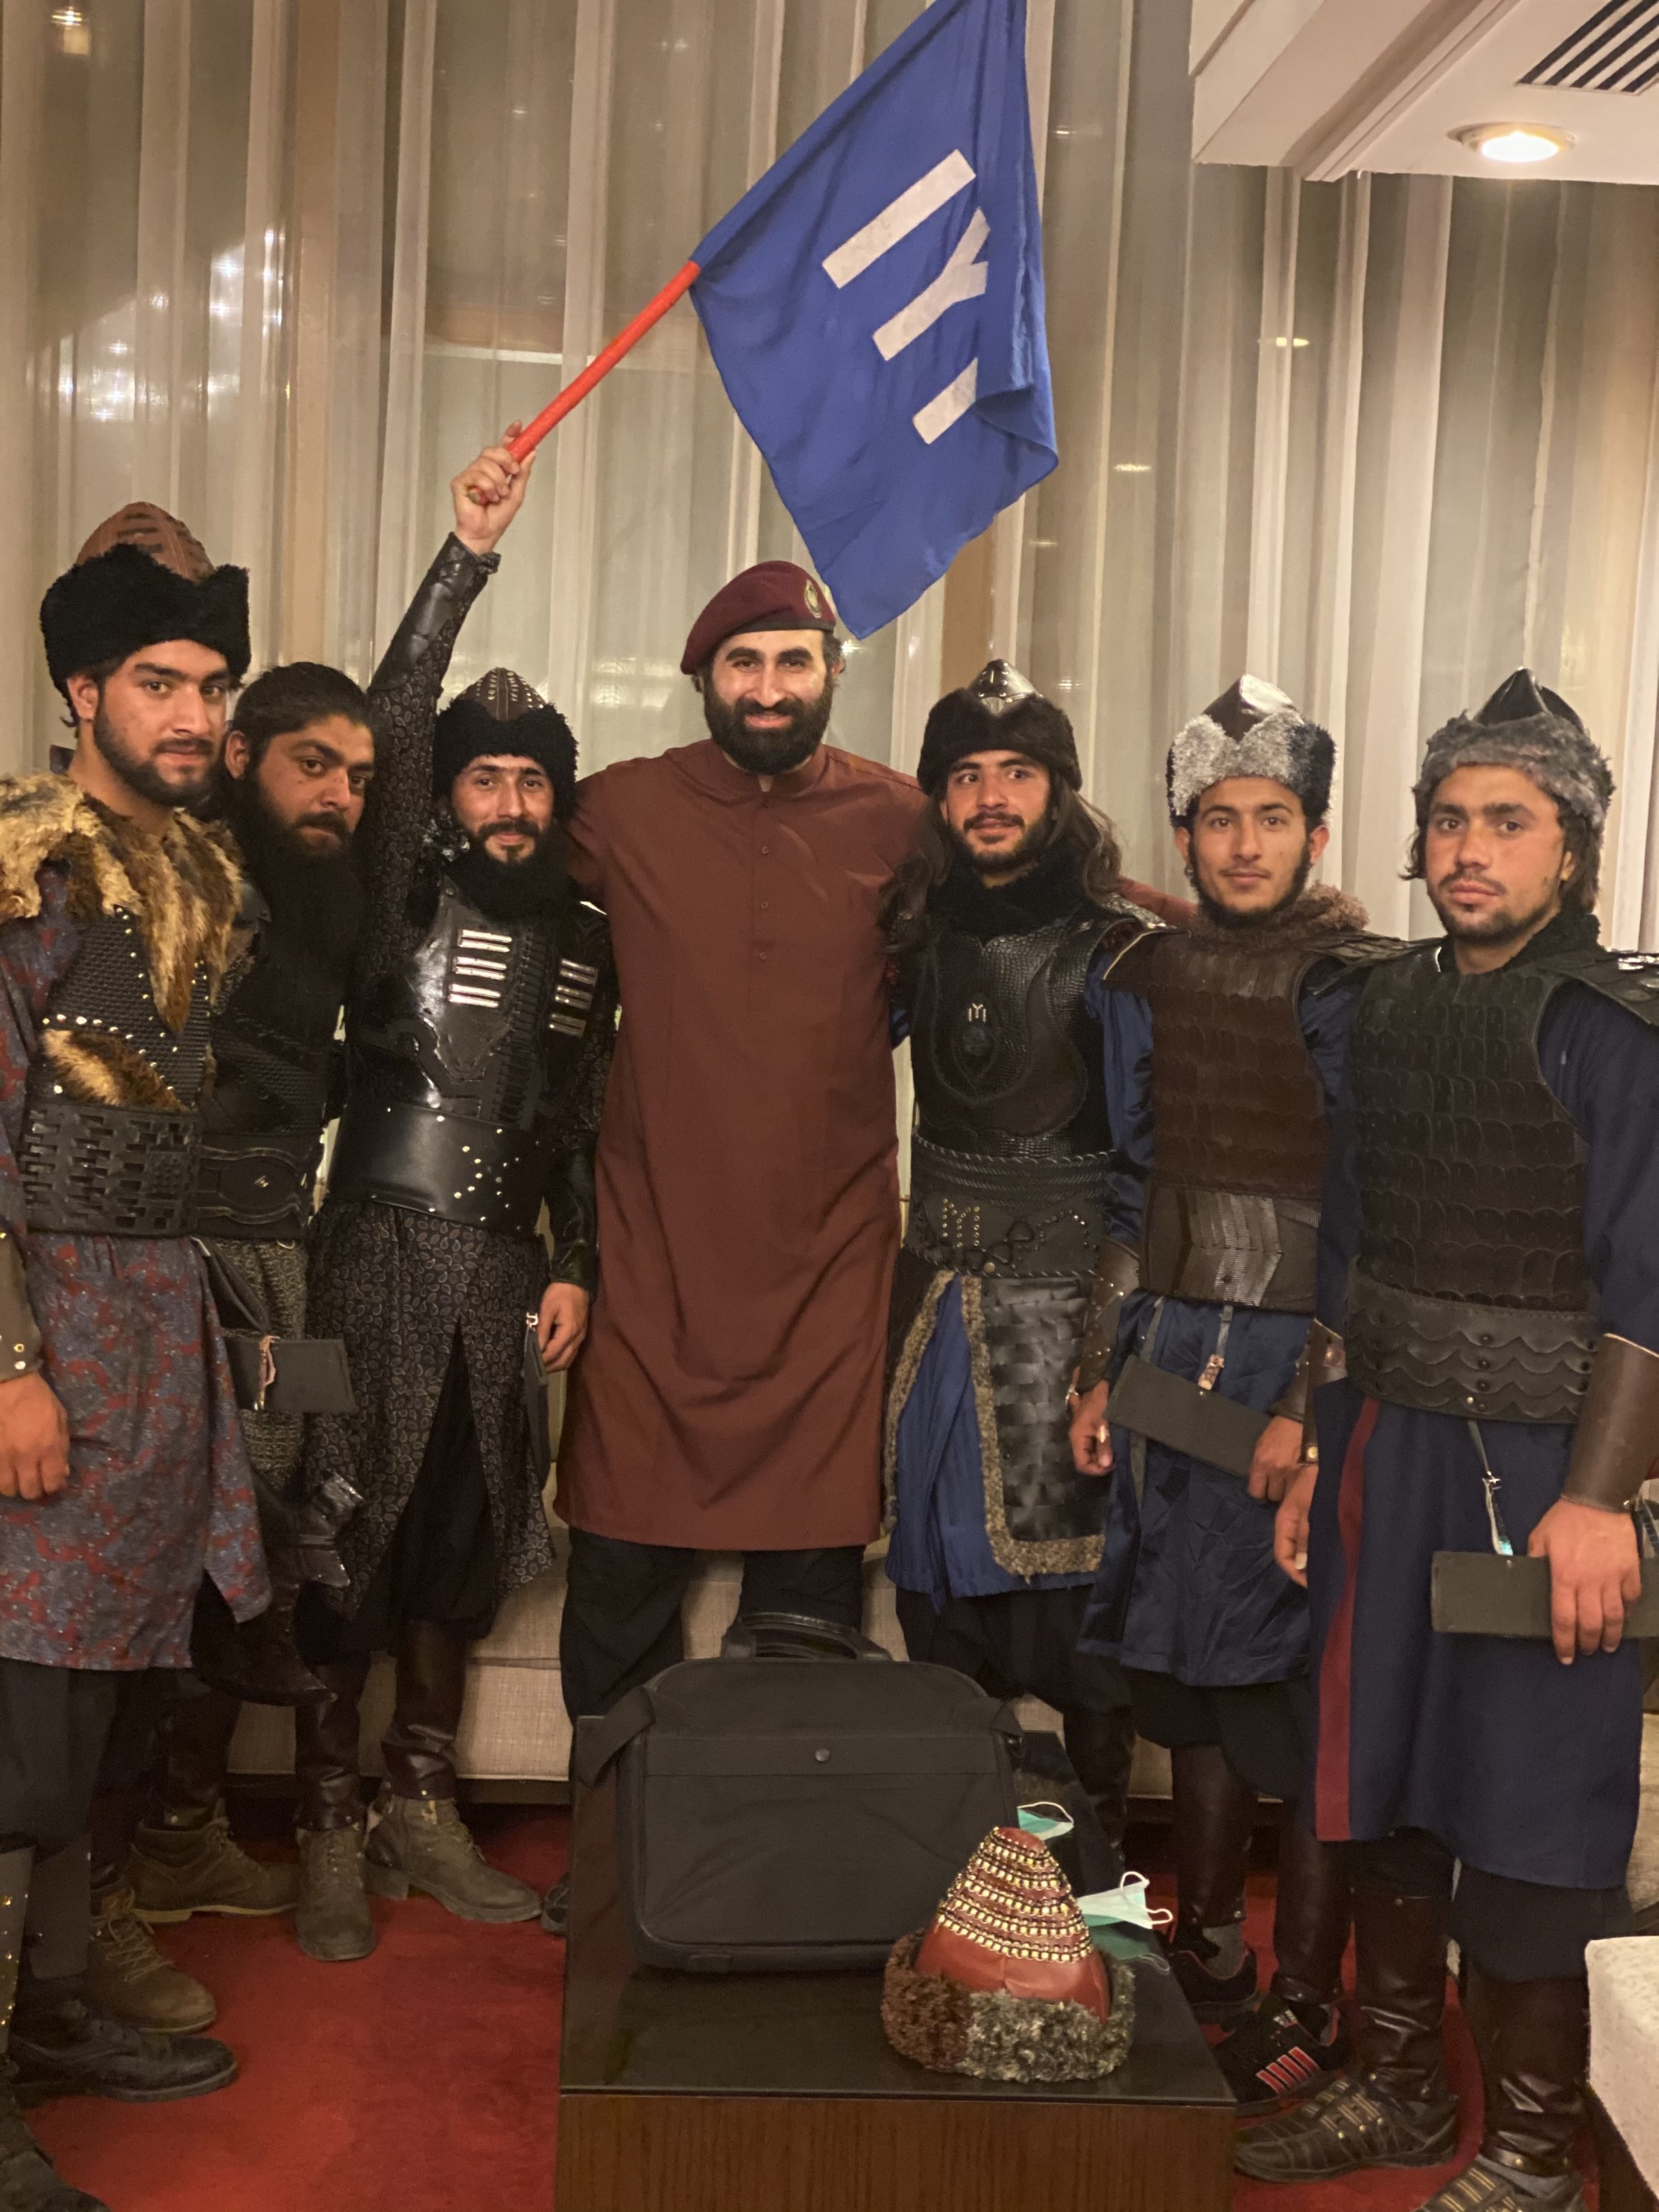  Celal Al (C) poses with the young Pakistani group shooting the 